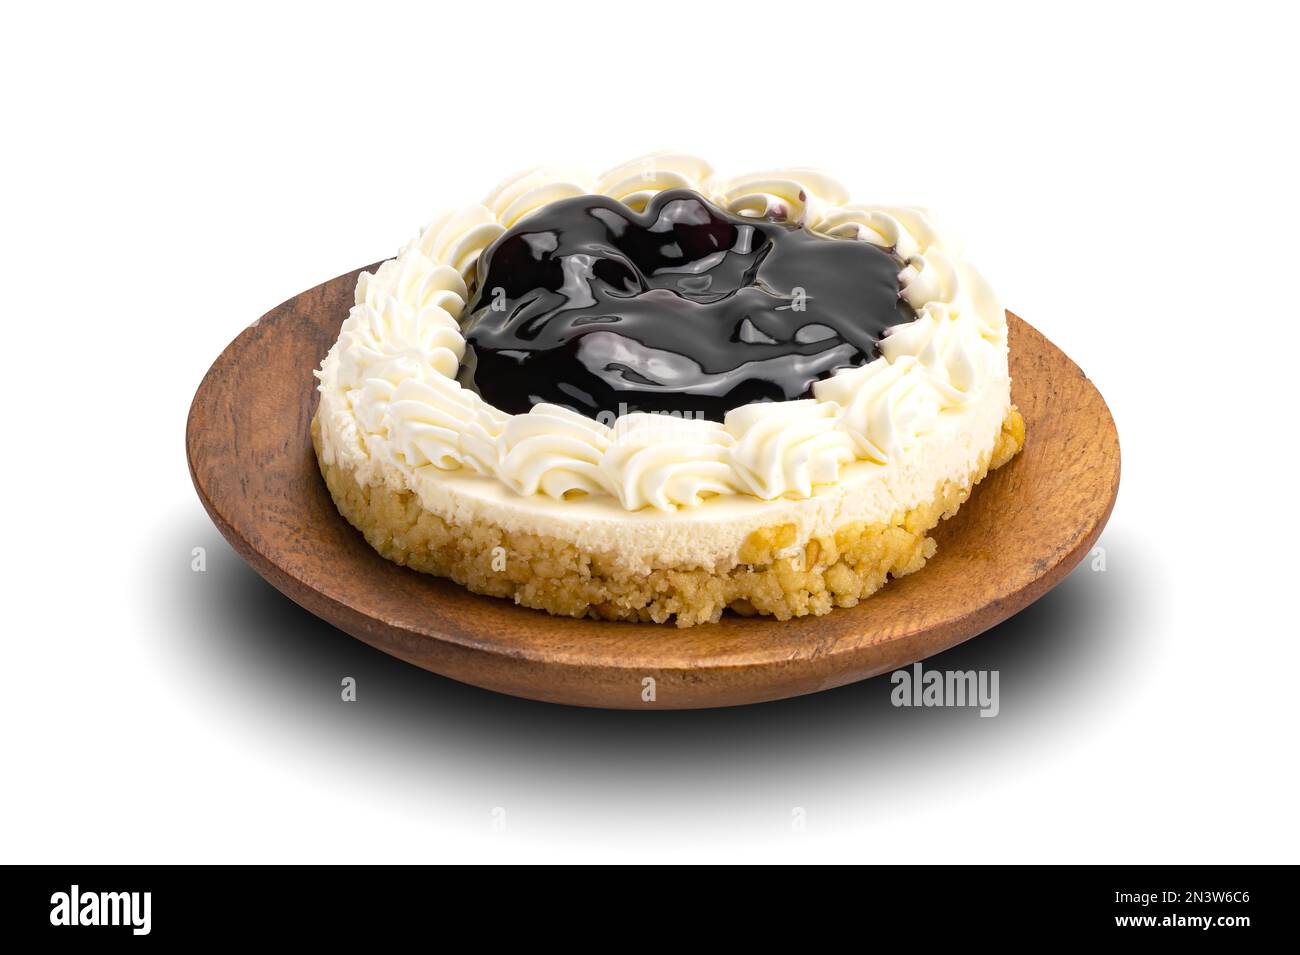 Delicious Homemade Blueberry Cheese Pie in wooden plate on white background with clipping path Stock Photo